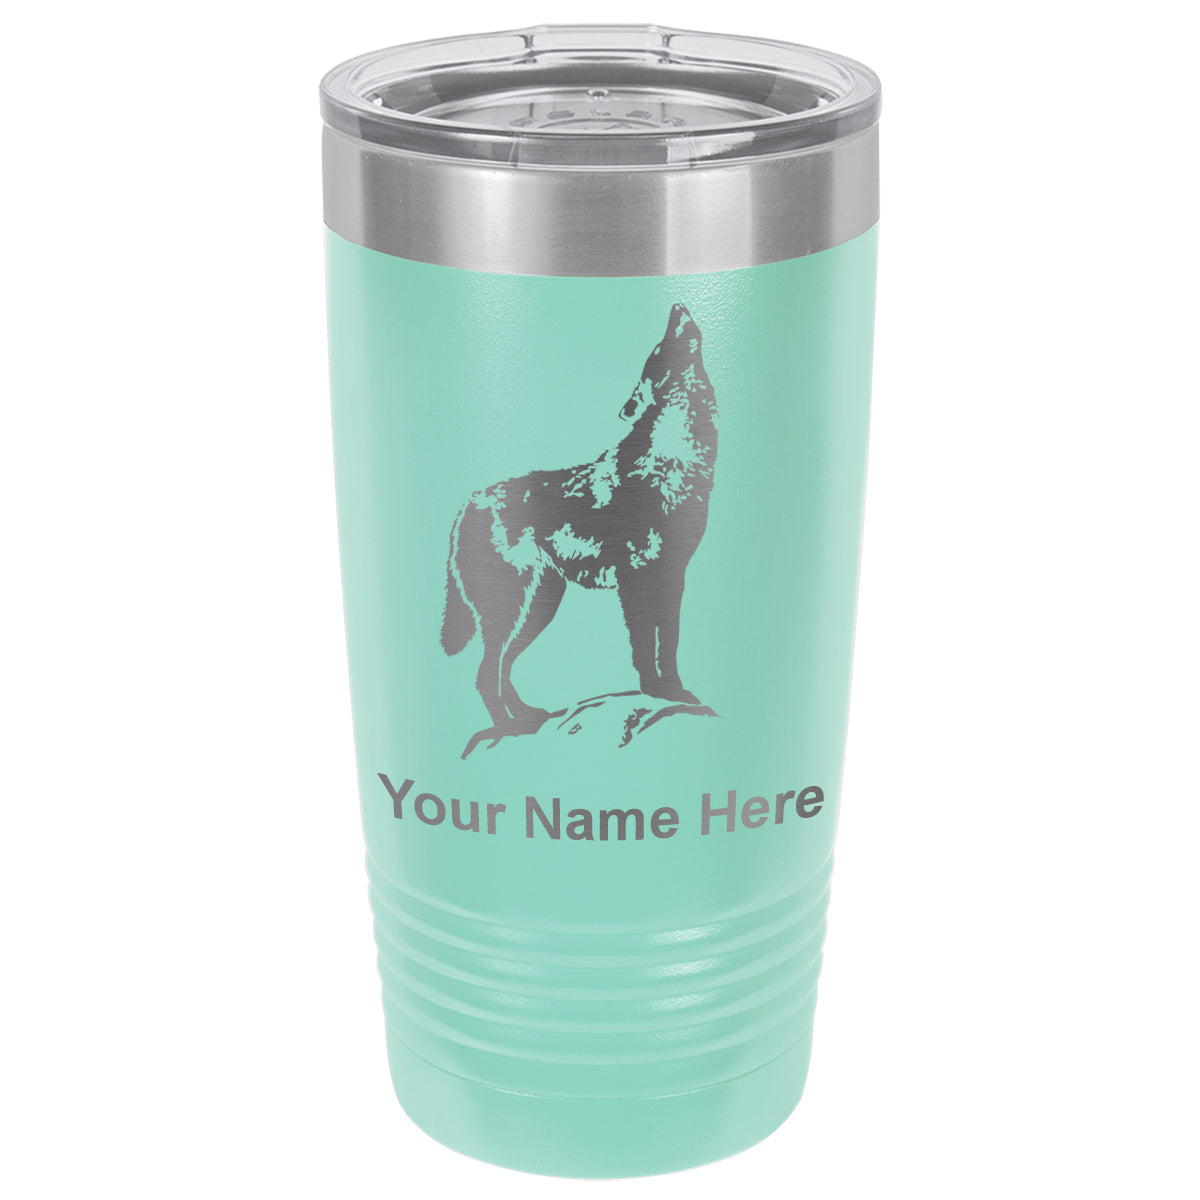 20oz Vacuum Insulated Tumbler Mug, Howling Wolf, Personalized Engraving Included